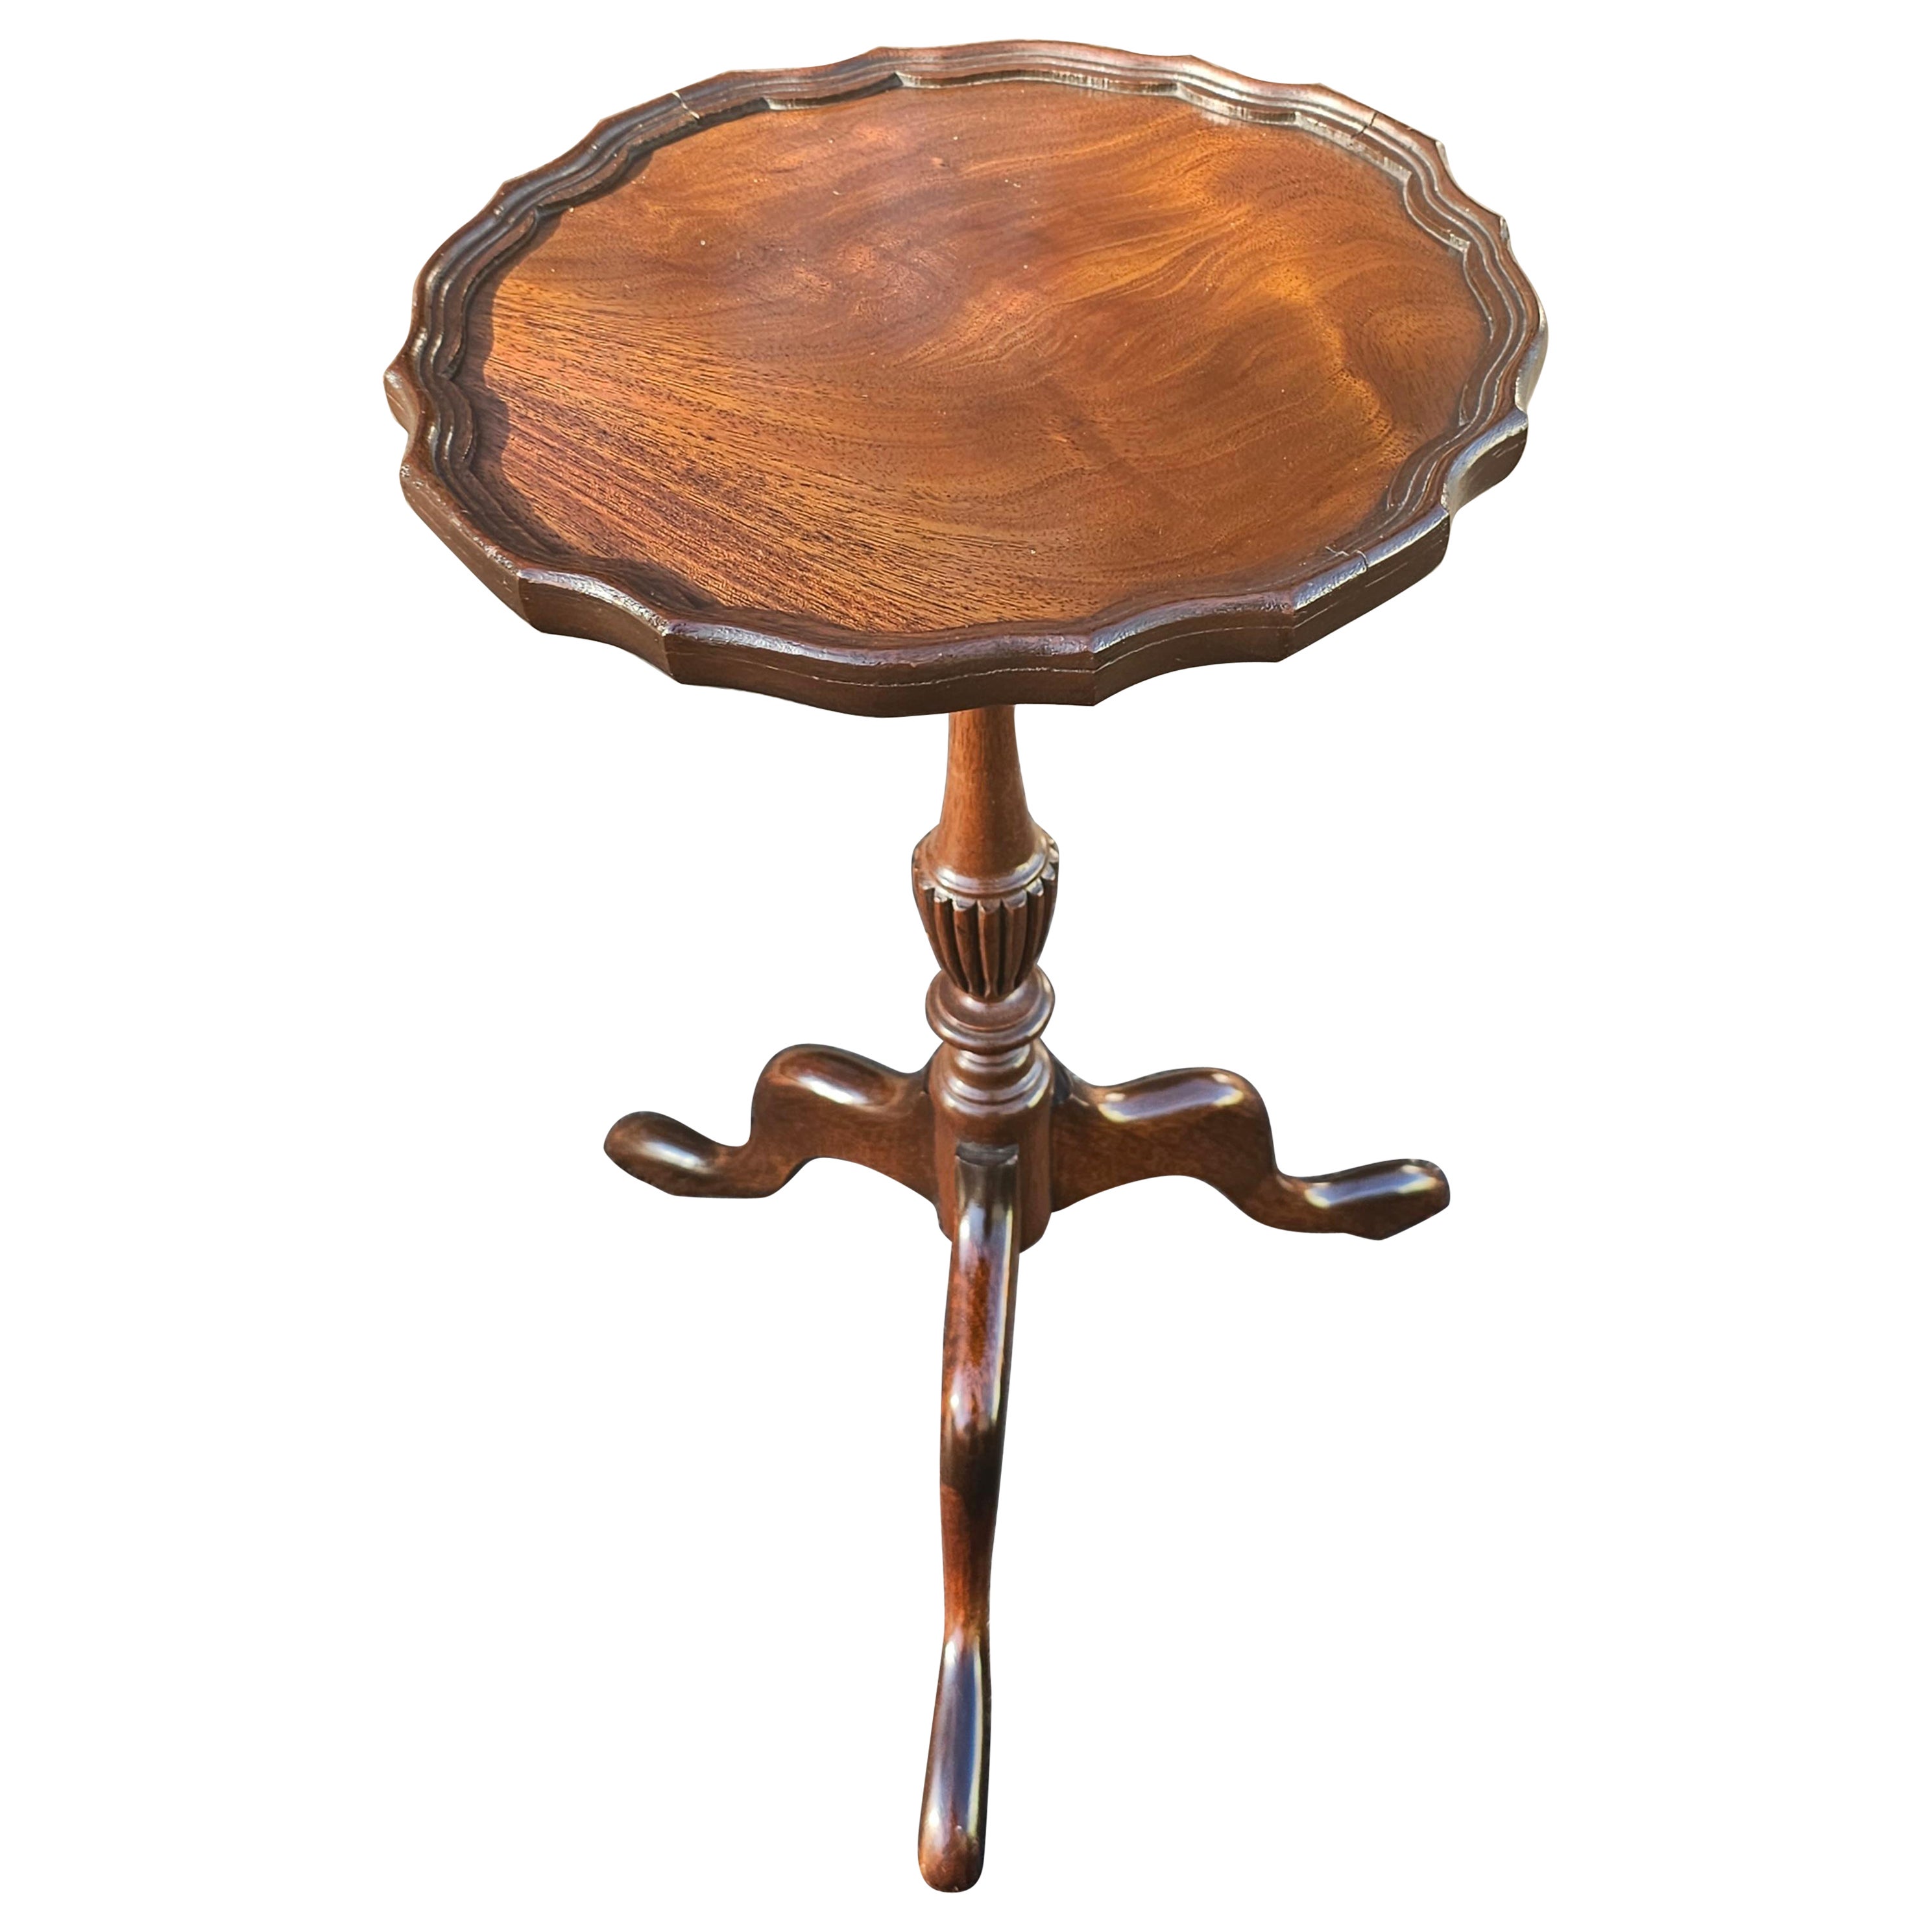 20th Century Solid Mahogany Pedestal Tripod Pie Crust Candle Stand w/Snake Feet